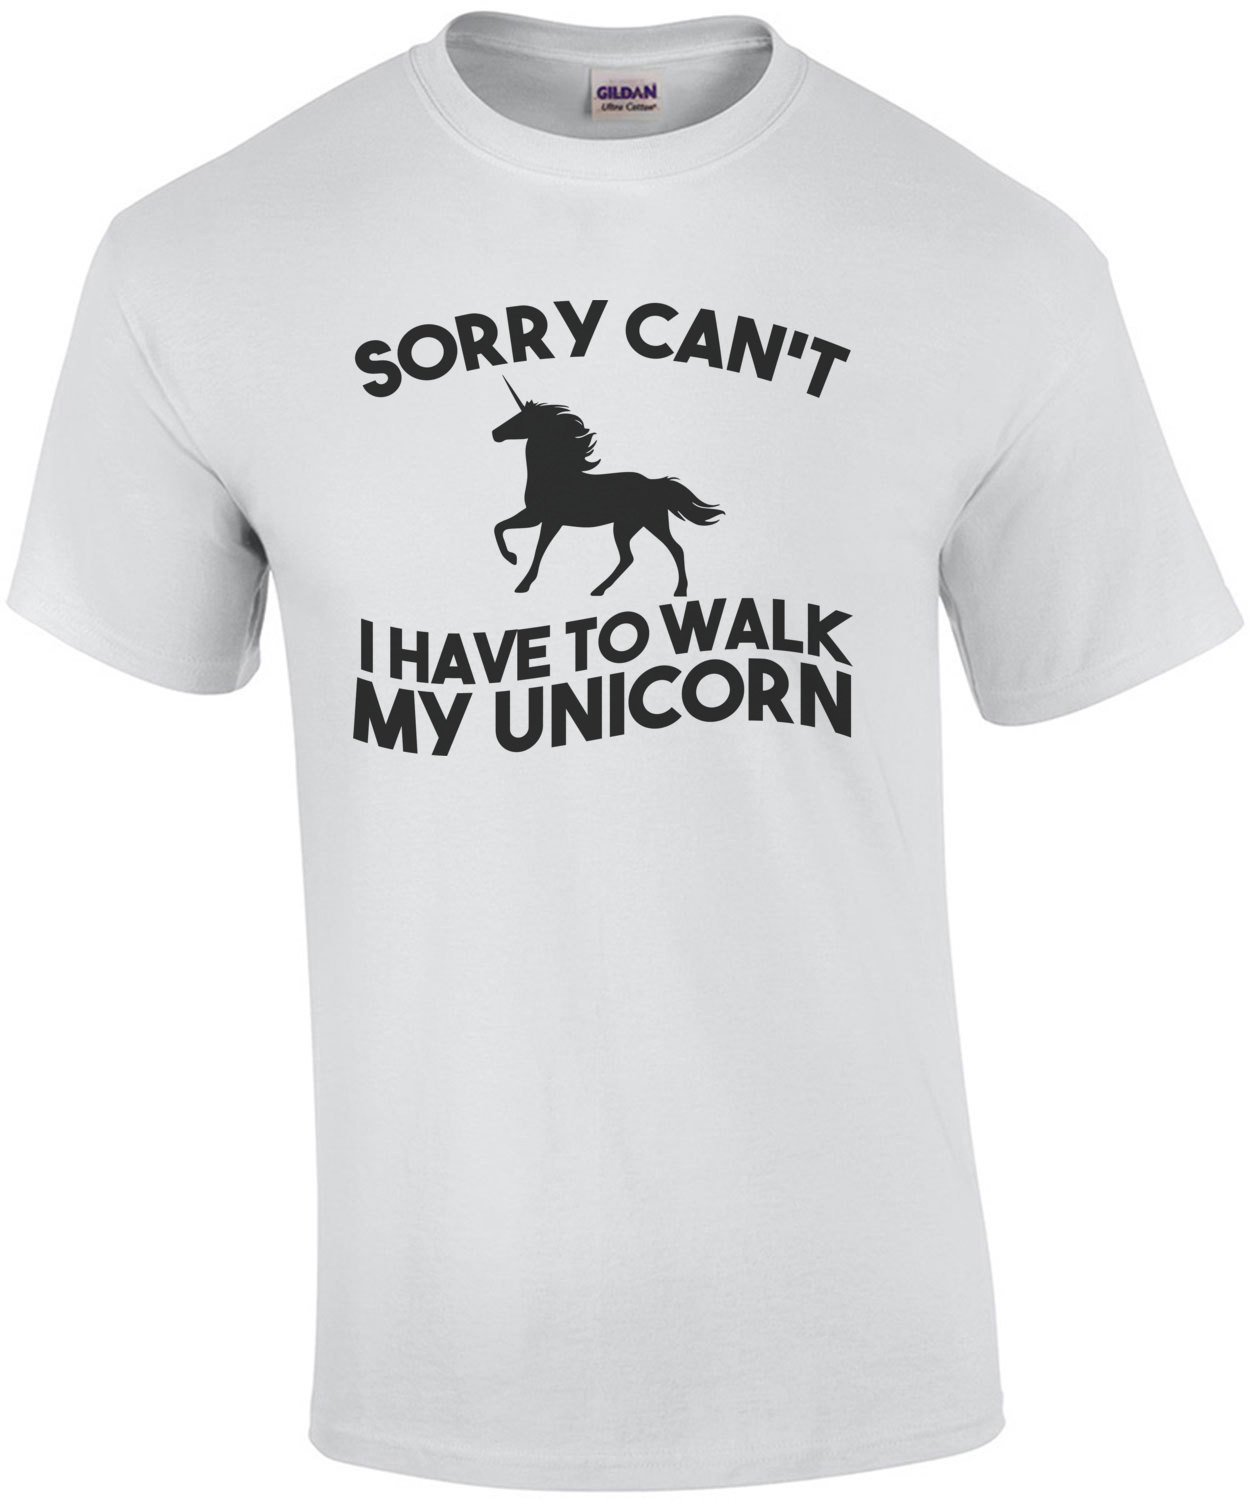 Sorry can't I have to walk my unicorn